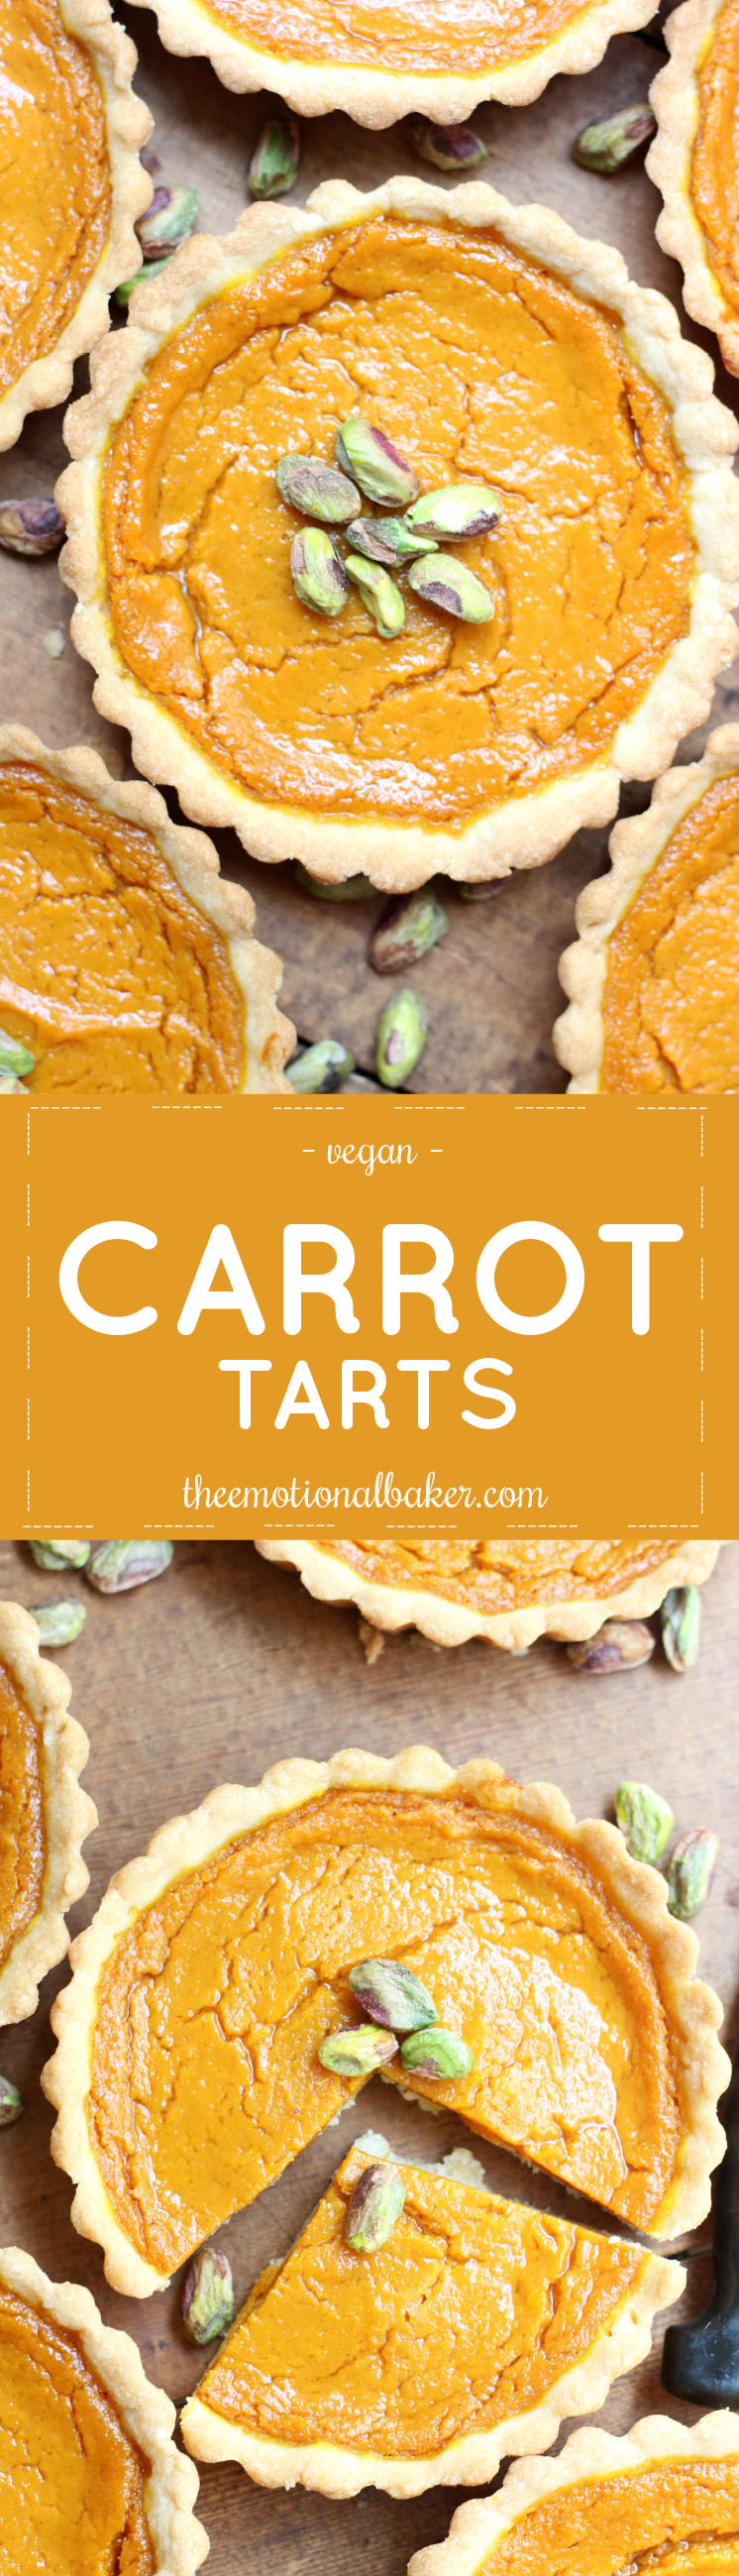 Add a new dessert to your Easter celebration - Carrot Tarts. These sweet mini pies are bursting with carrot flavor and accented with cardamom and nutmeg. 